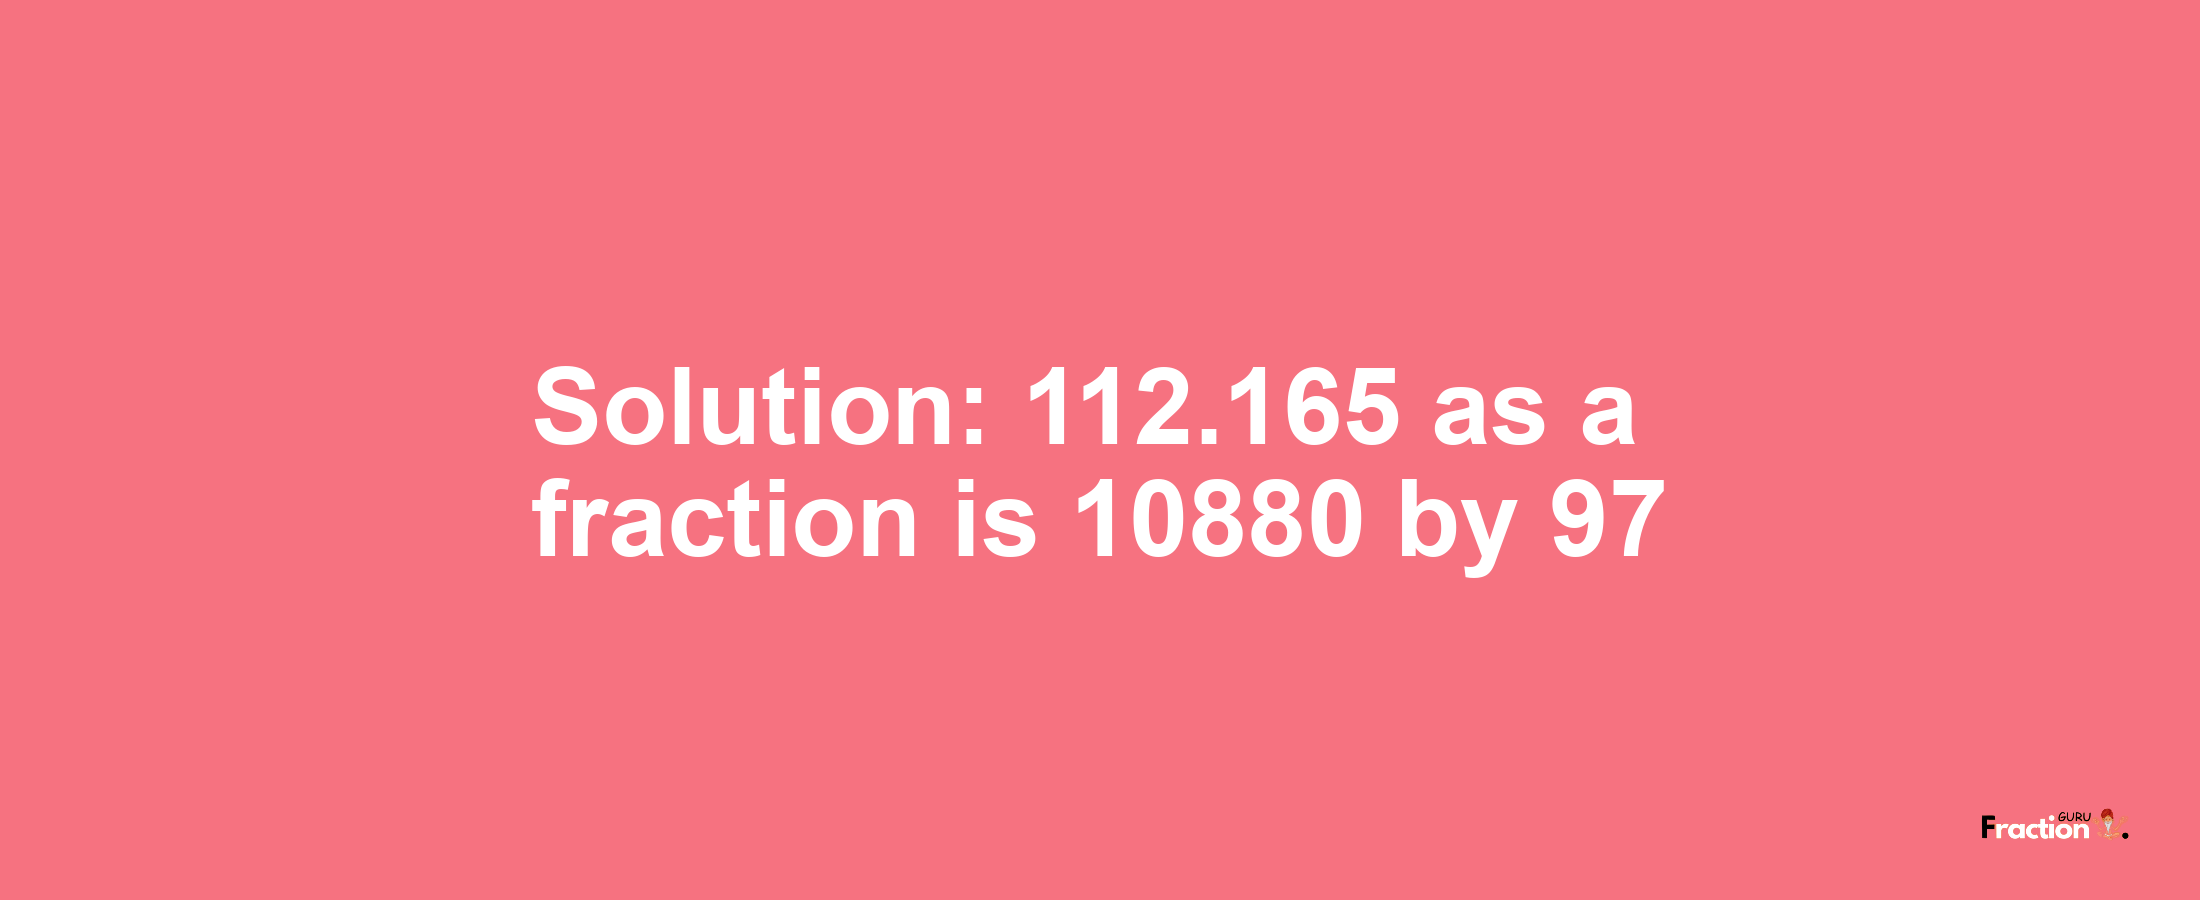 Solution:112.165 as a fraction is 10880/97